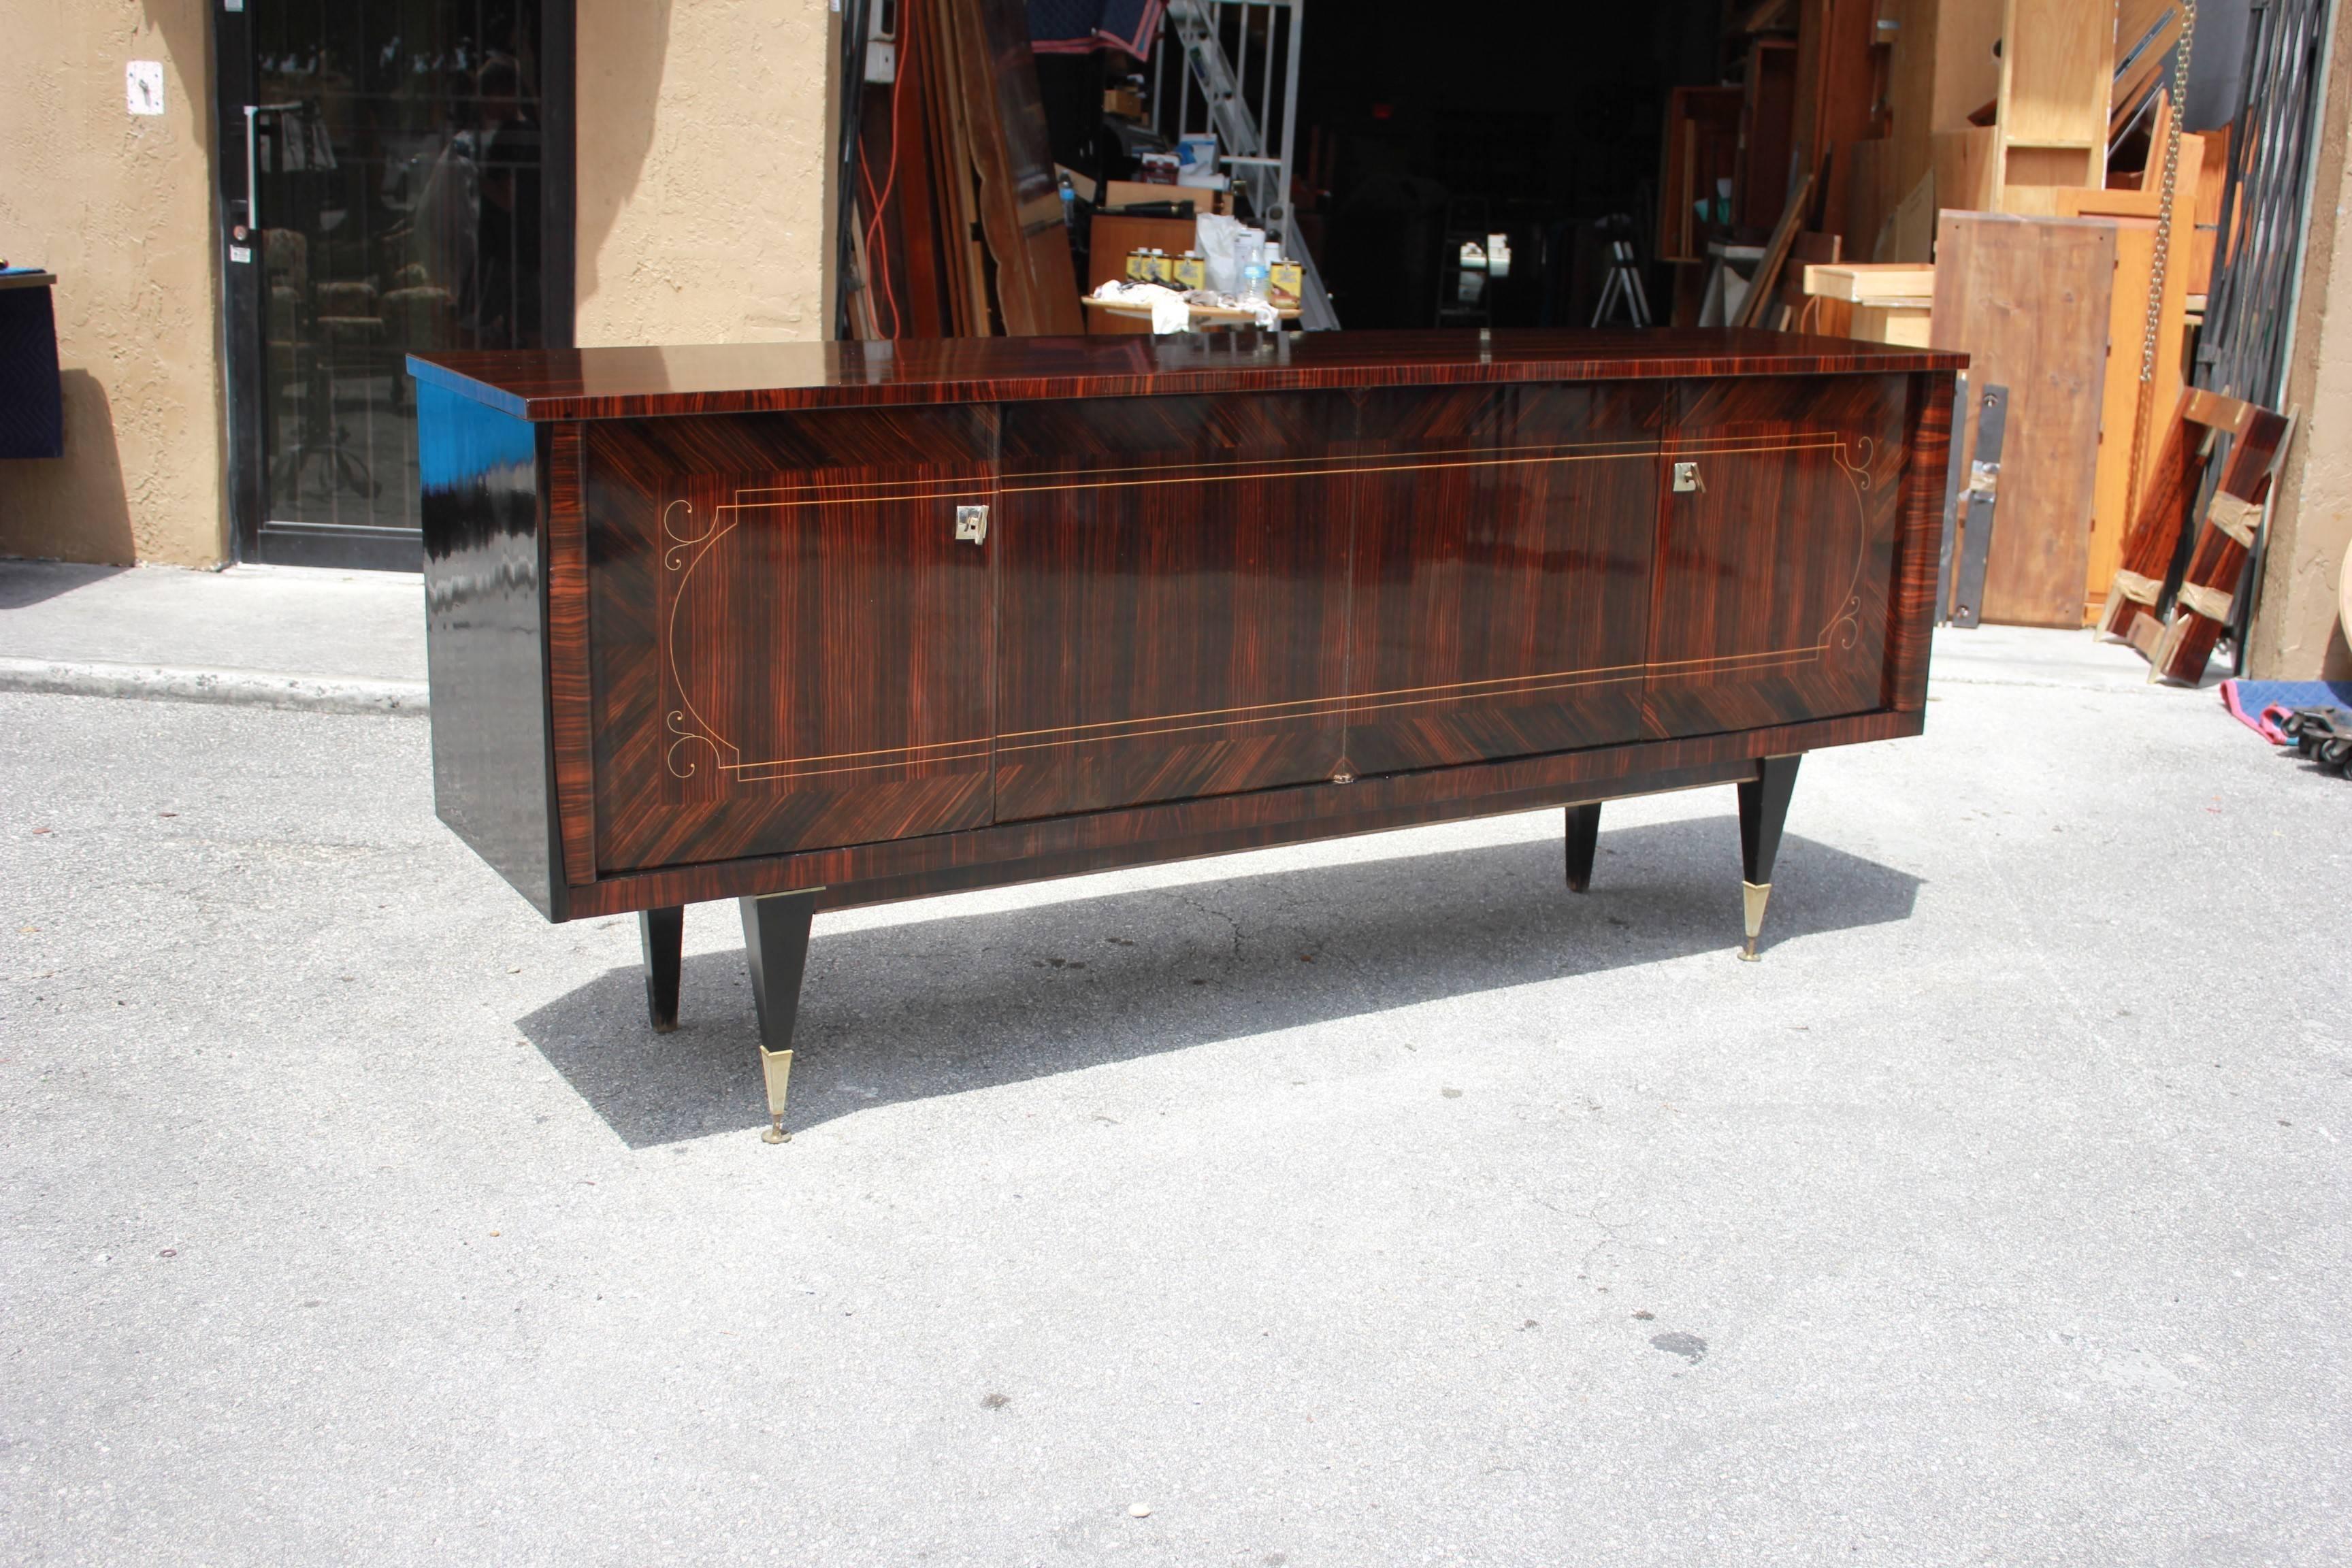 Beautiful French Art Deco exotic Macassar ebony dark grain sideboard or buffet with two drawers inside and all four shelves adjustable, you can remove the shelves if you need more place, beautiful bronze hardware detail, circa 1940s. Size 93.75